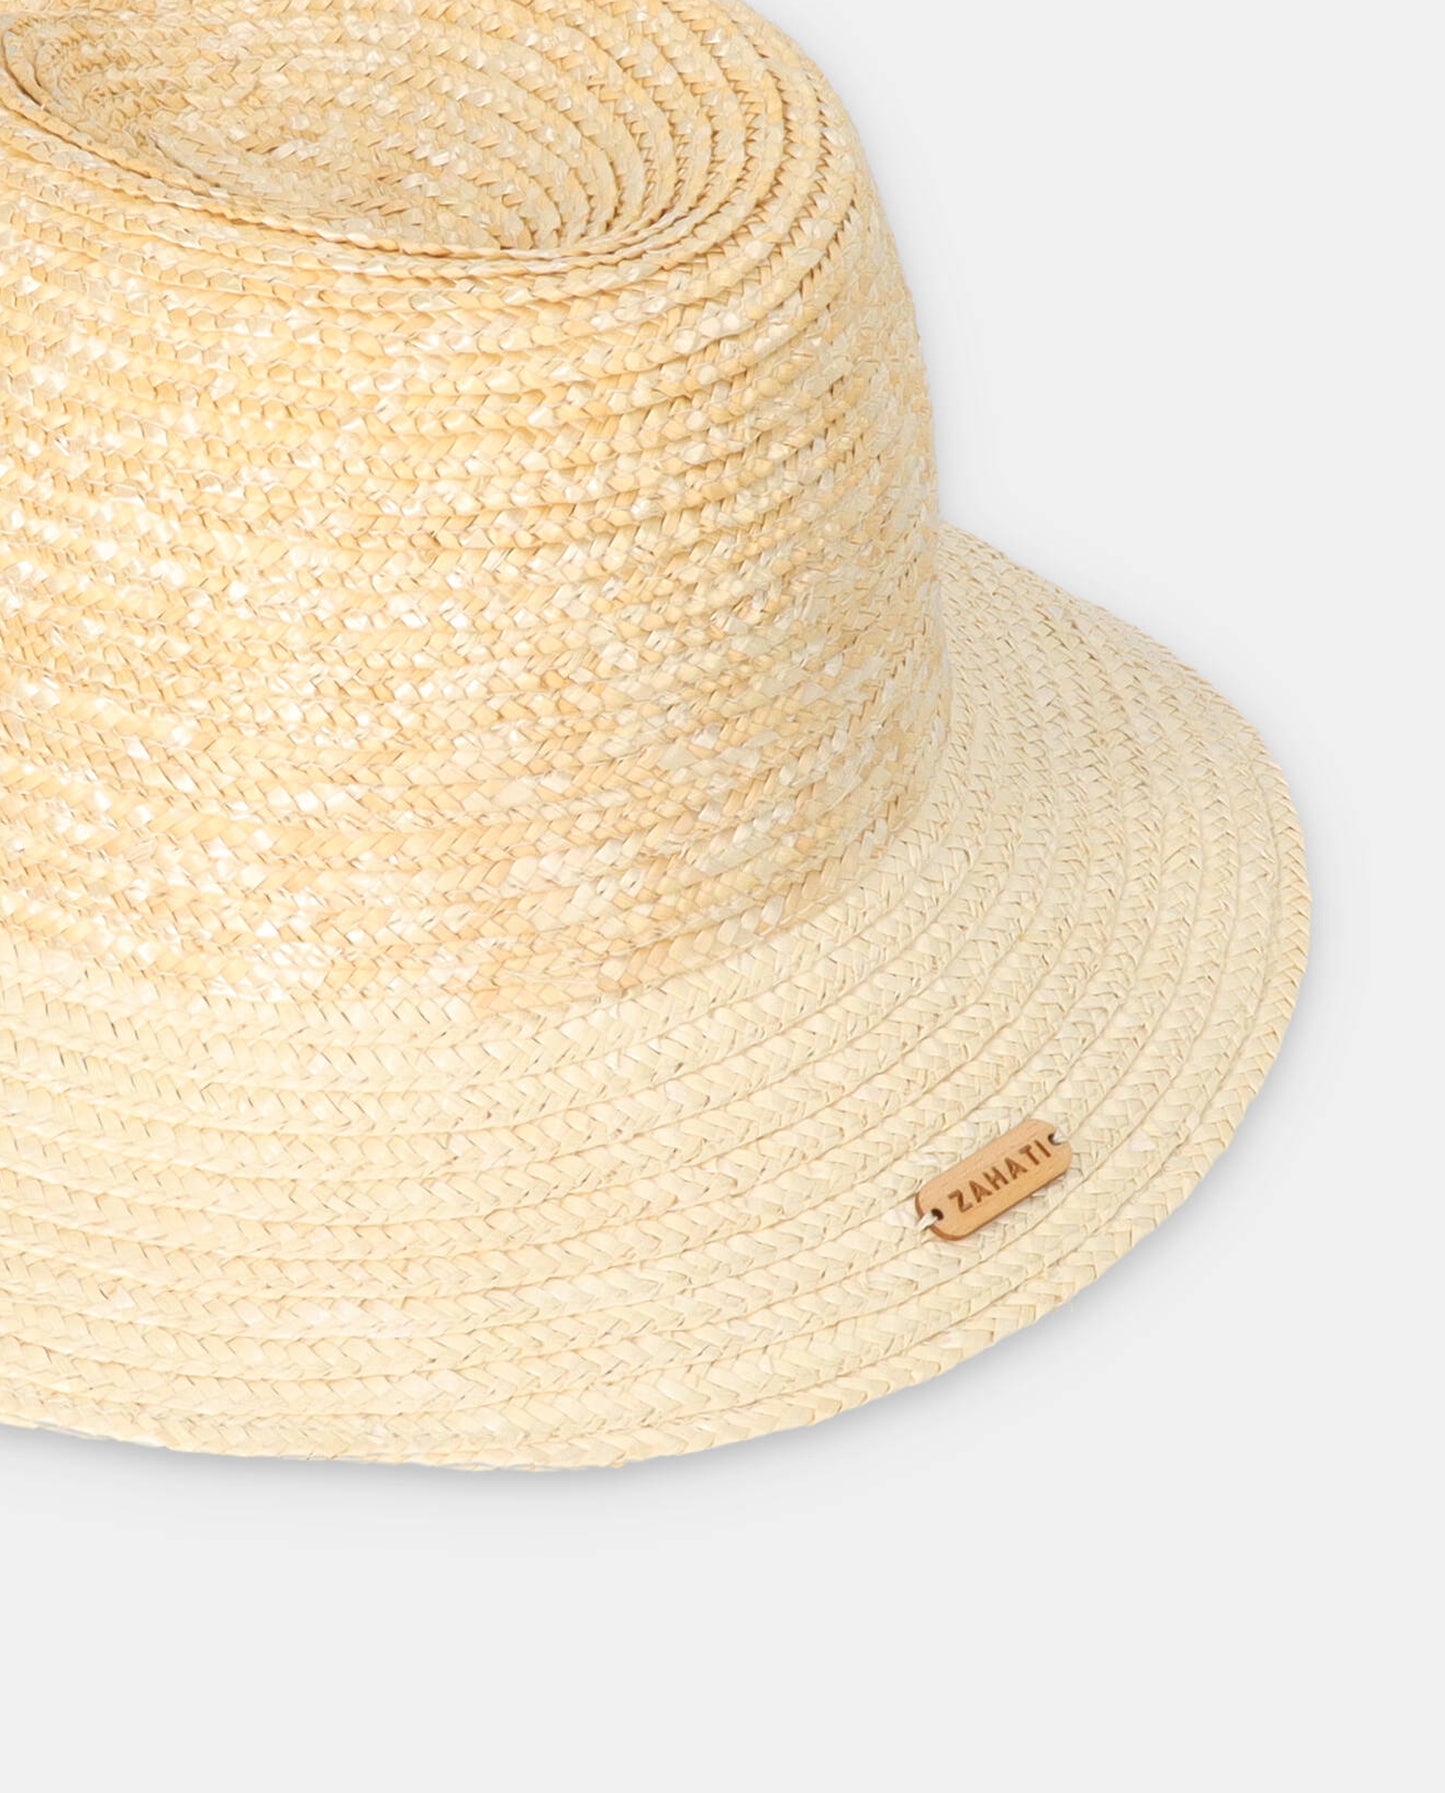 White two-tone Beetle hat